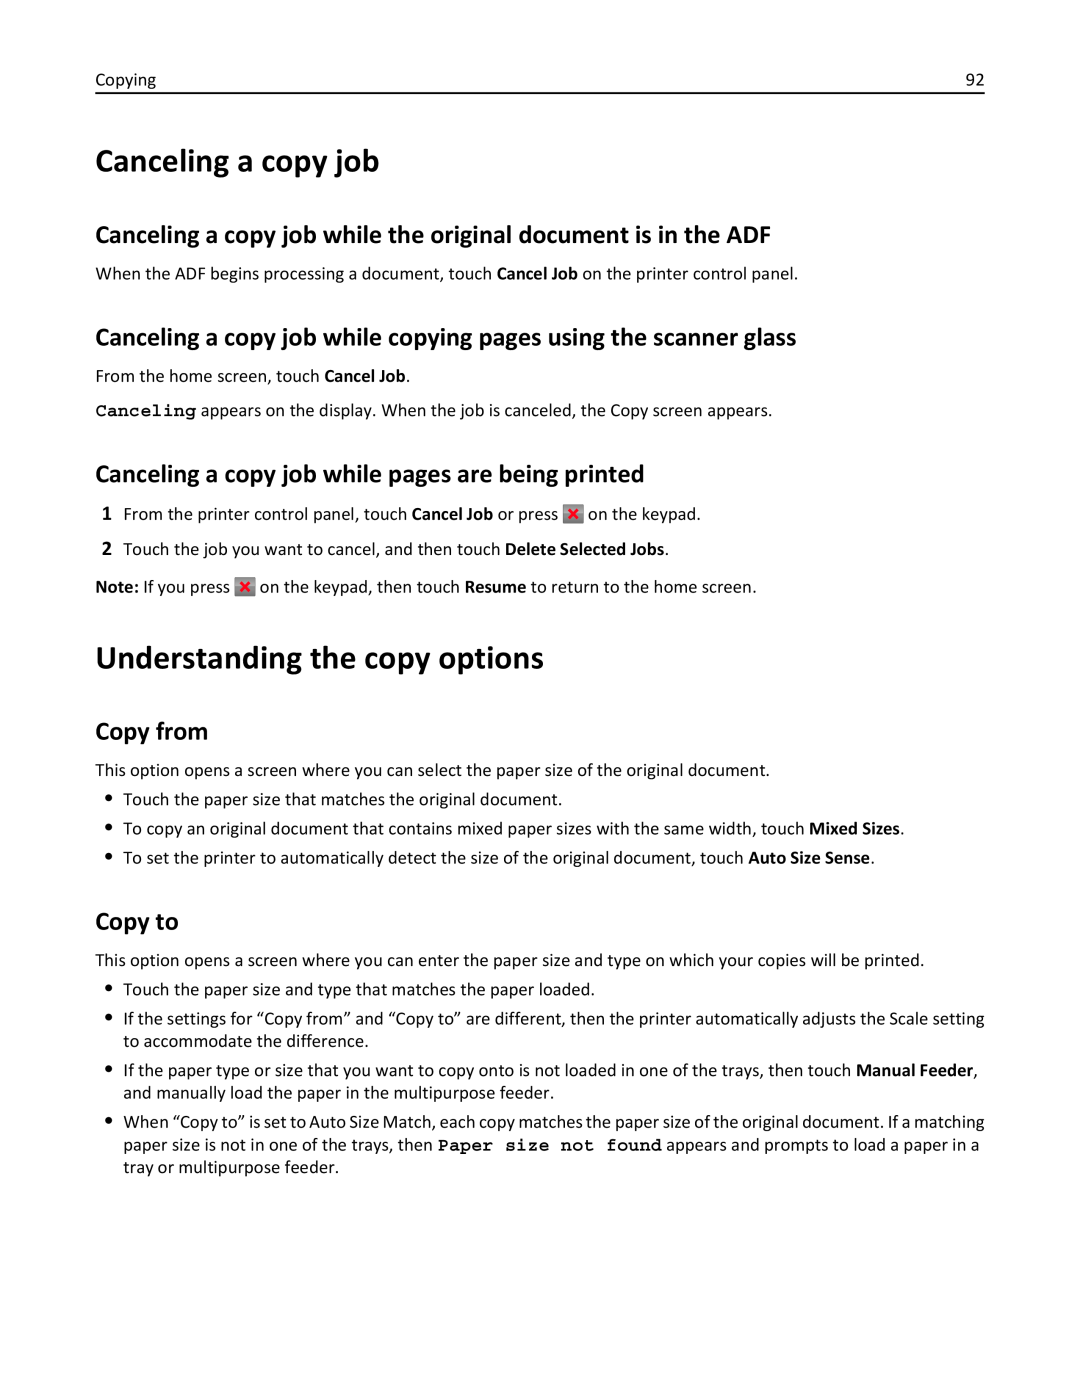 Lexmark 35S5701 Understanding the copy options, Canceling a copy job while pages are being printed, Copy from, Copy to 